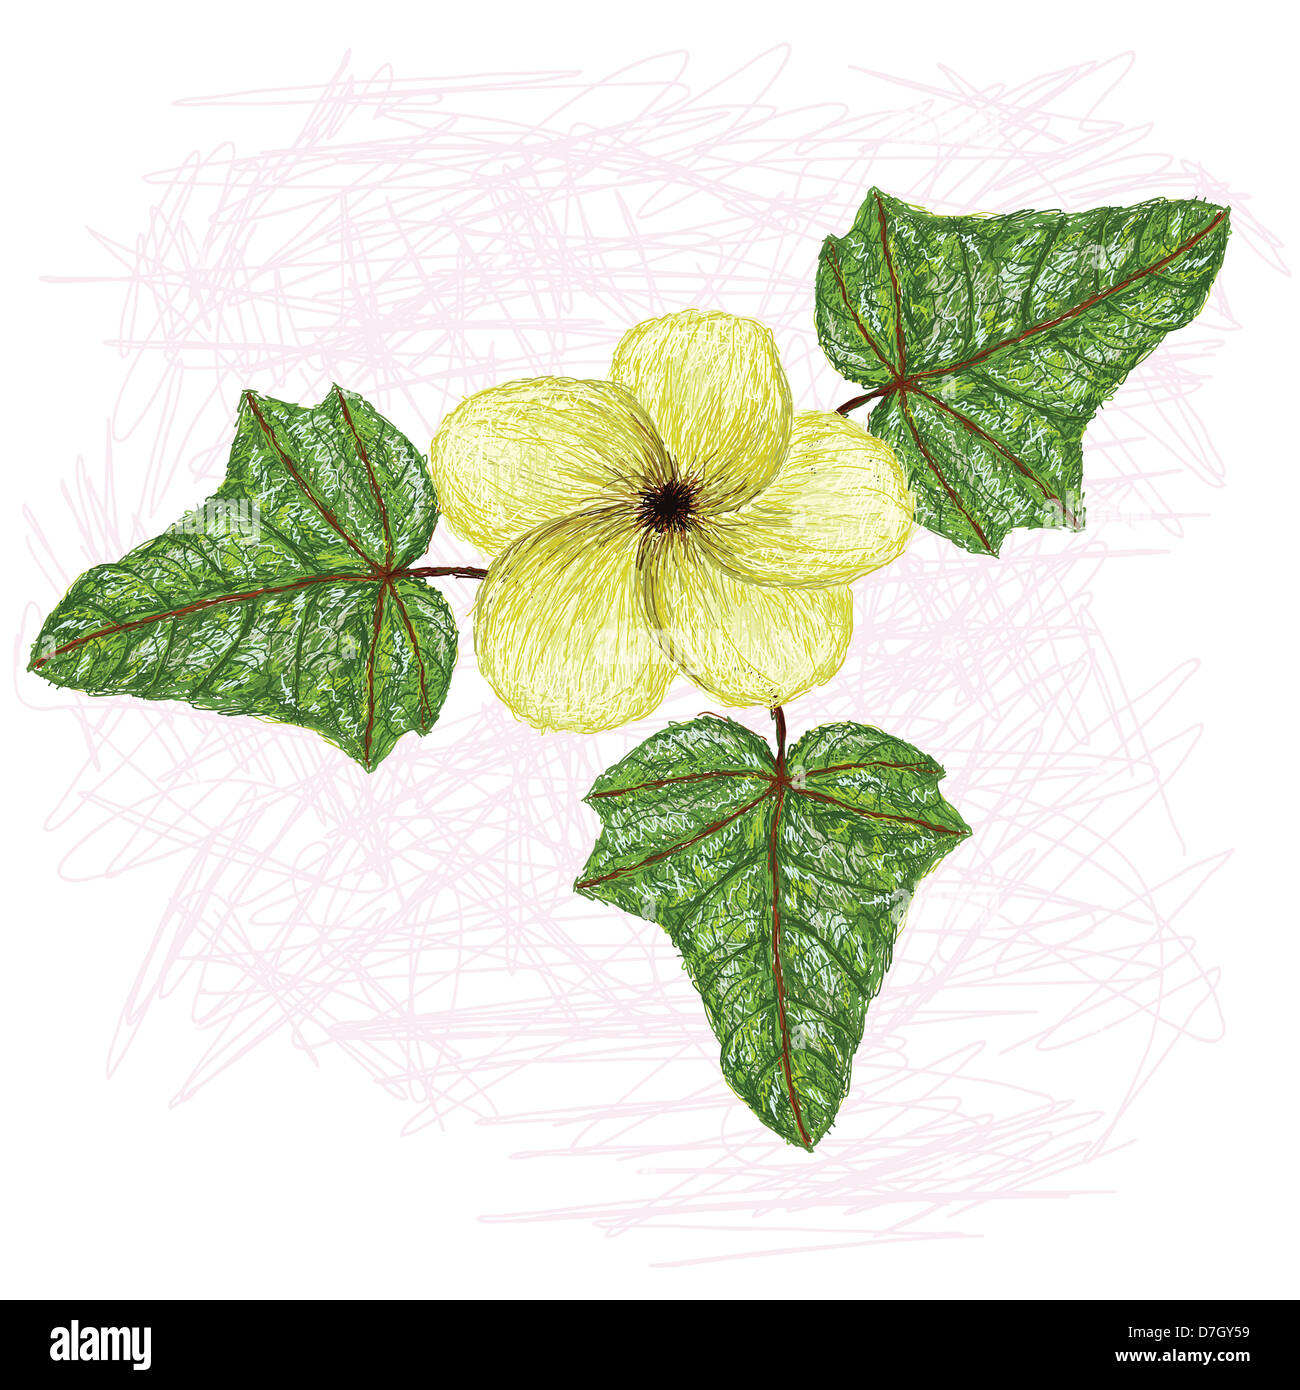 illustration of edible lagikway leaves and flower. Scientific name abelmoschus manihot. Stock Photo